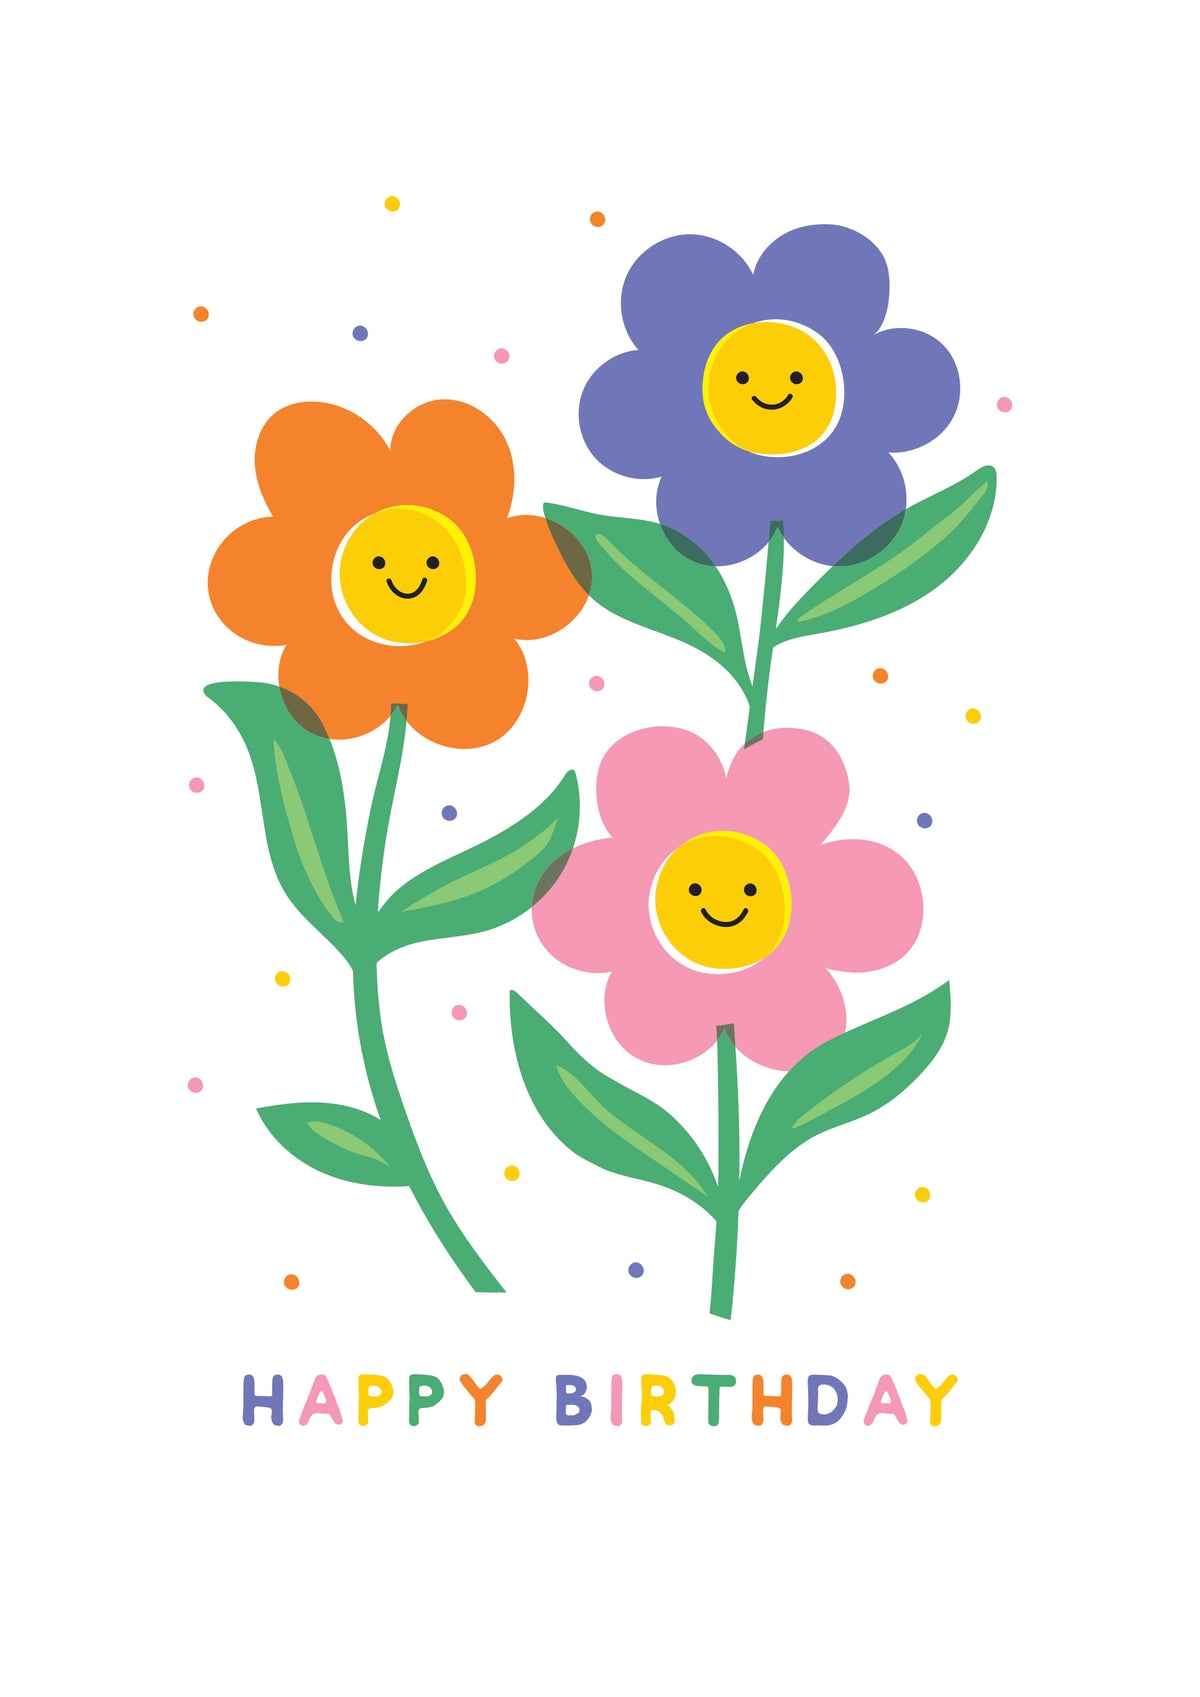 A greetings card with a white background and colourful cartoon flowers with smiley faces in the centre. The words happy birthday are written underneath in rainbow colours.